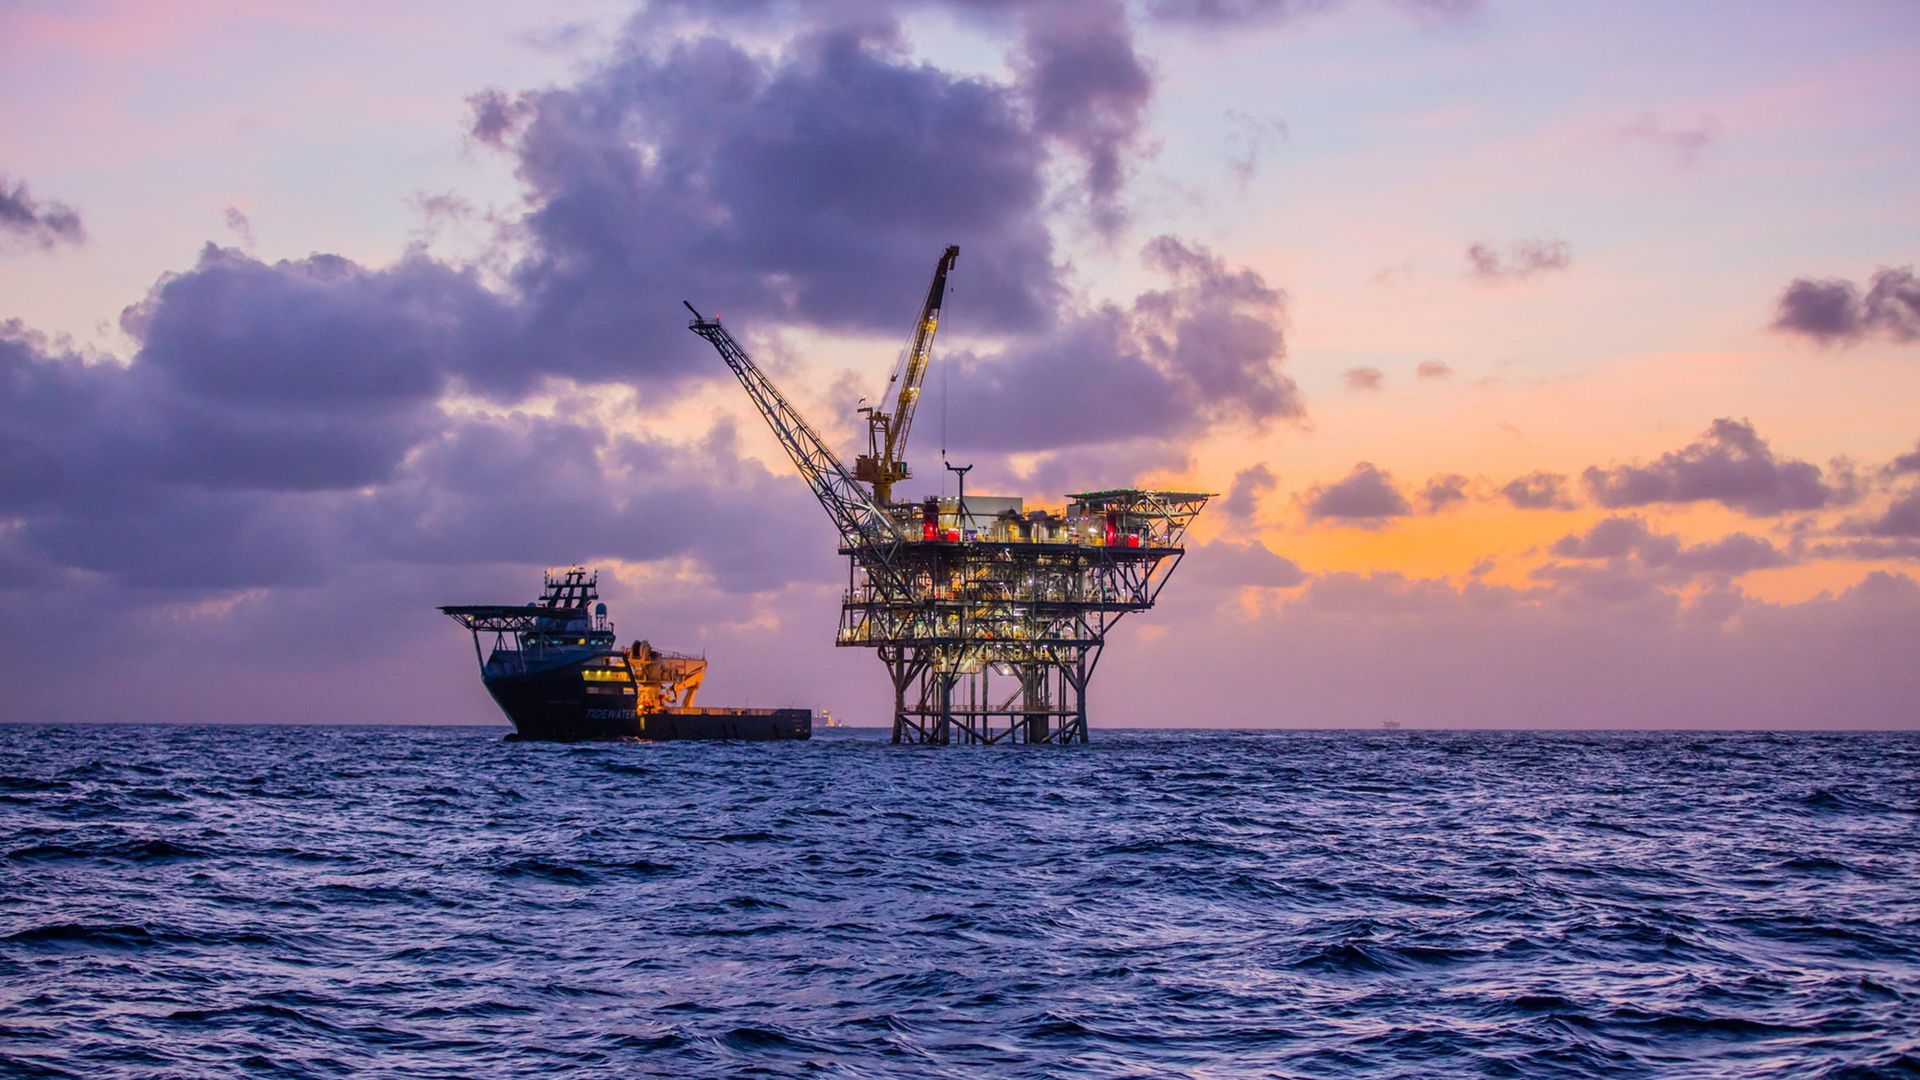 An oil rig in the middle of the ocean at sunset.